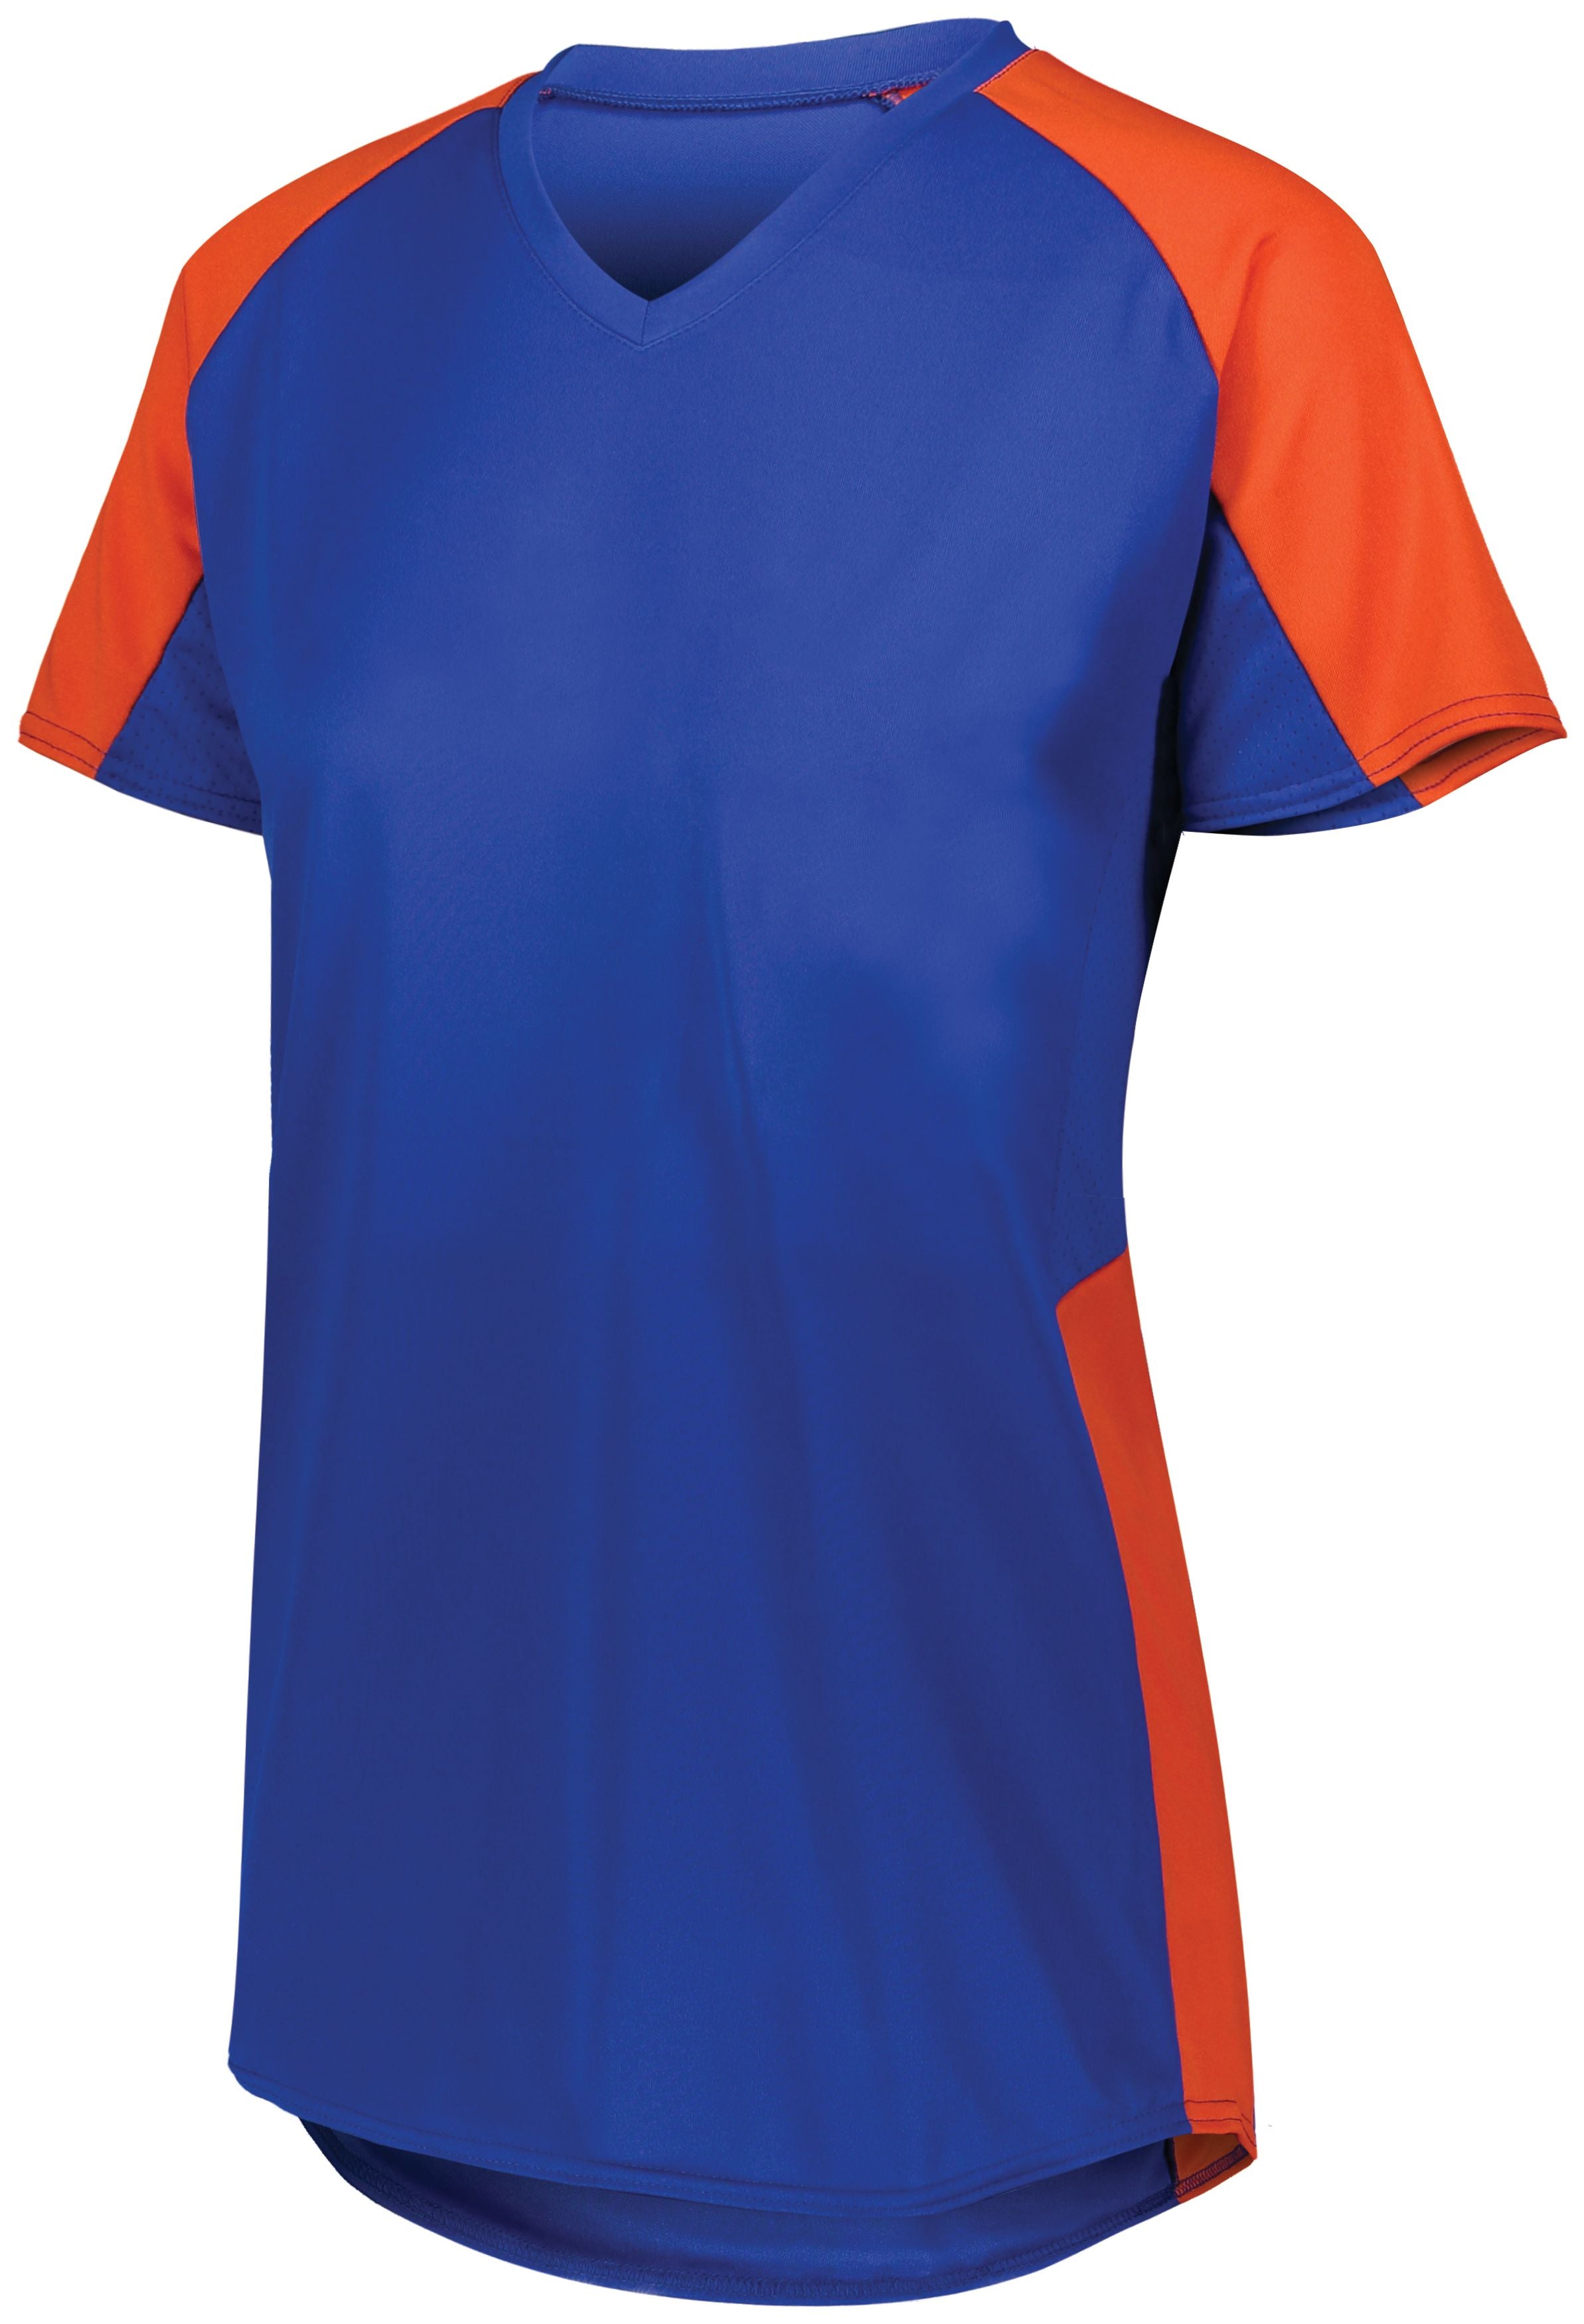 Augusta Sportswear Ladies Cutter Jersey in Royal/Orange  -Part of the Ladies, Ladies-Jersey, Augusta-Products, Softball, Shirts product lines at KanaleyCreations.com